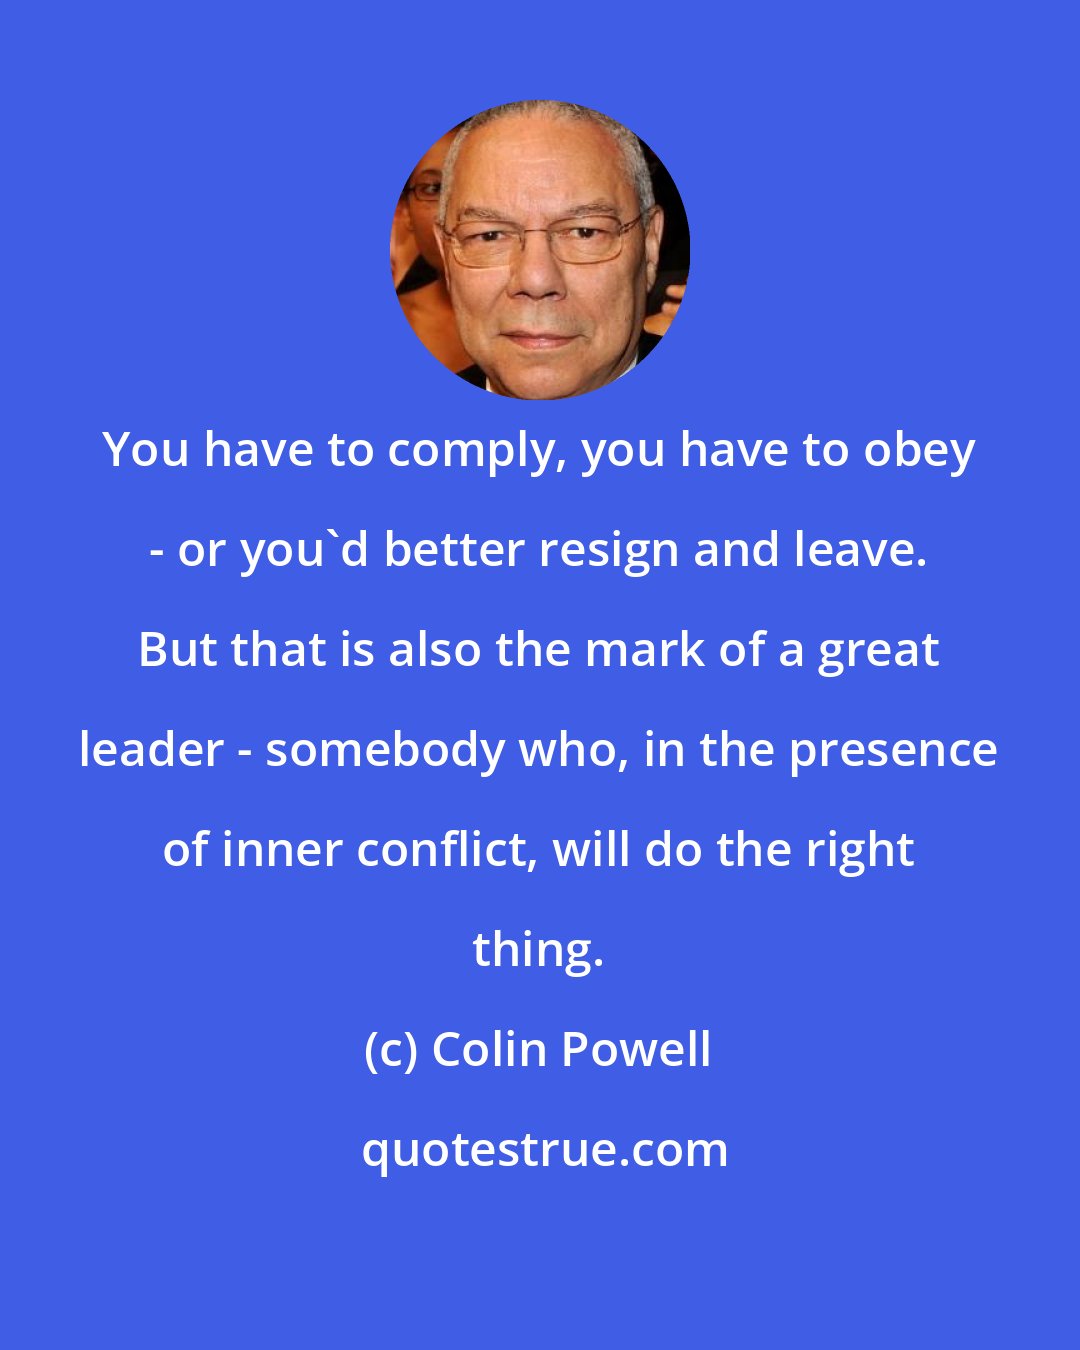 Colin Powell: You have to comply, you have to obey - or you'd better resign and leave. But that is also the mark of a great leader - somebody who, in the presence of inner conflict, will do the right thing.